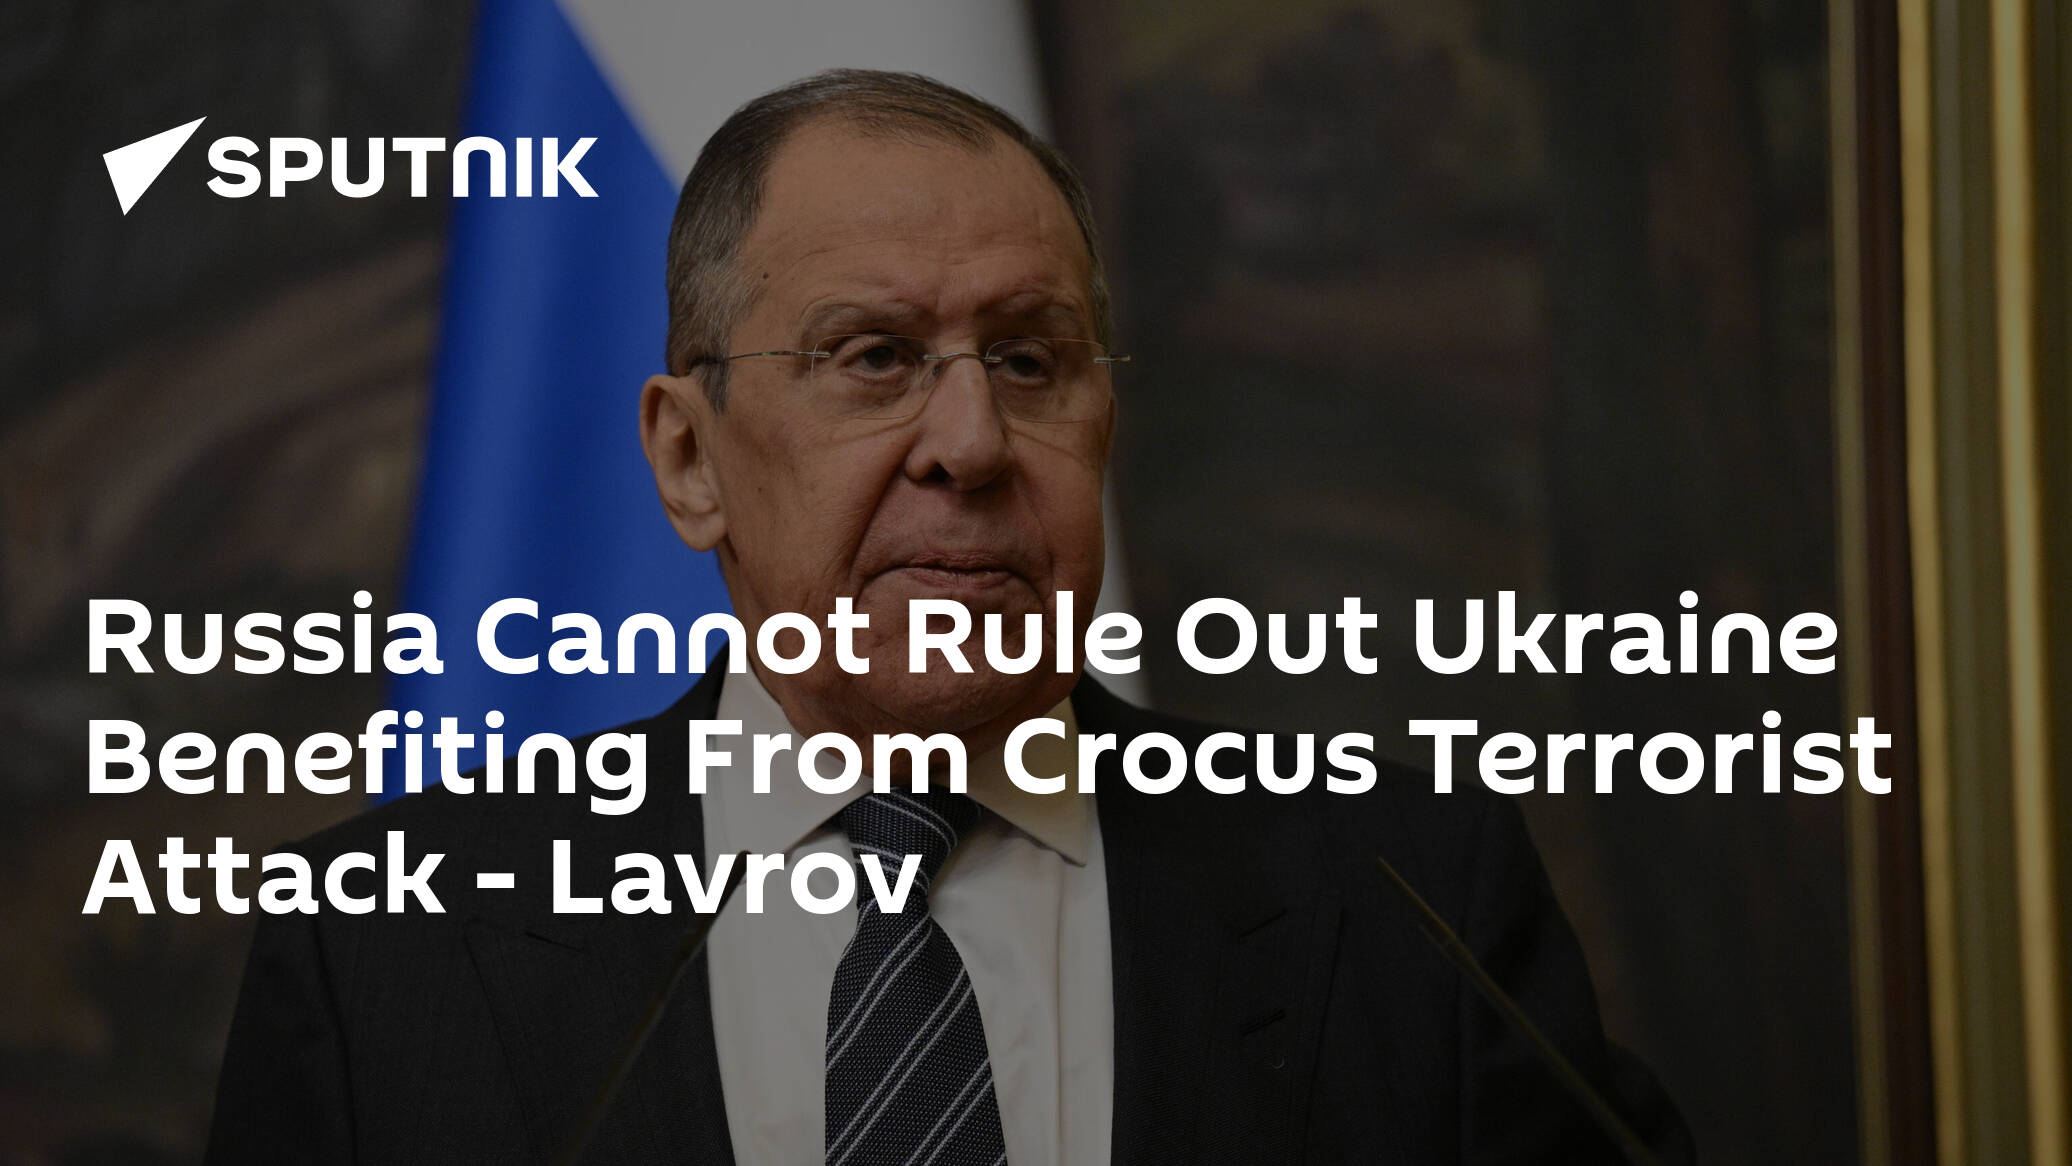 Russia Cannot Rule Out Ukraine Benefiting From Crocus Terrorist Attack